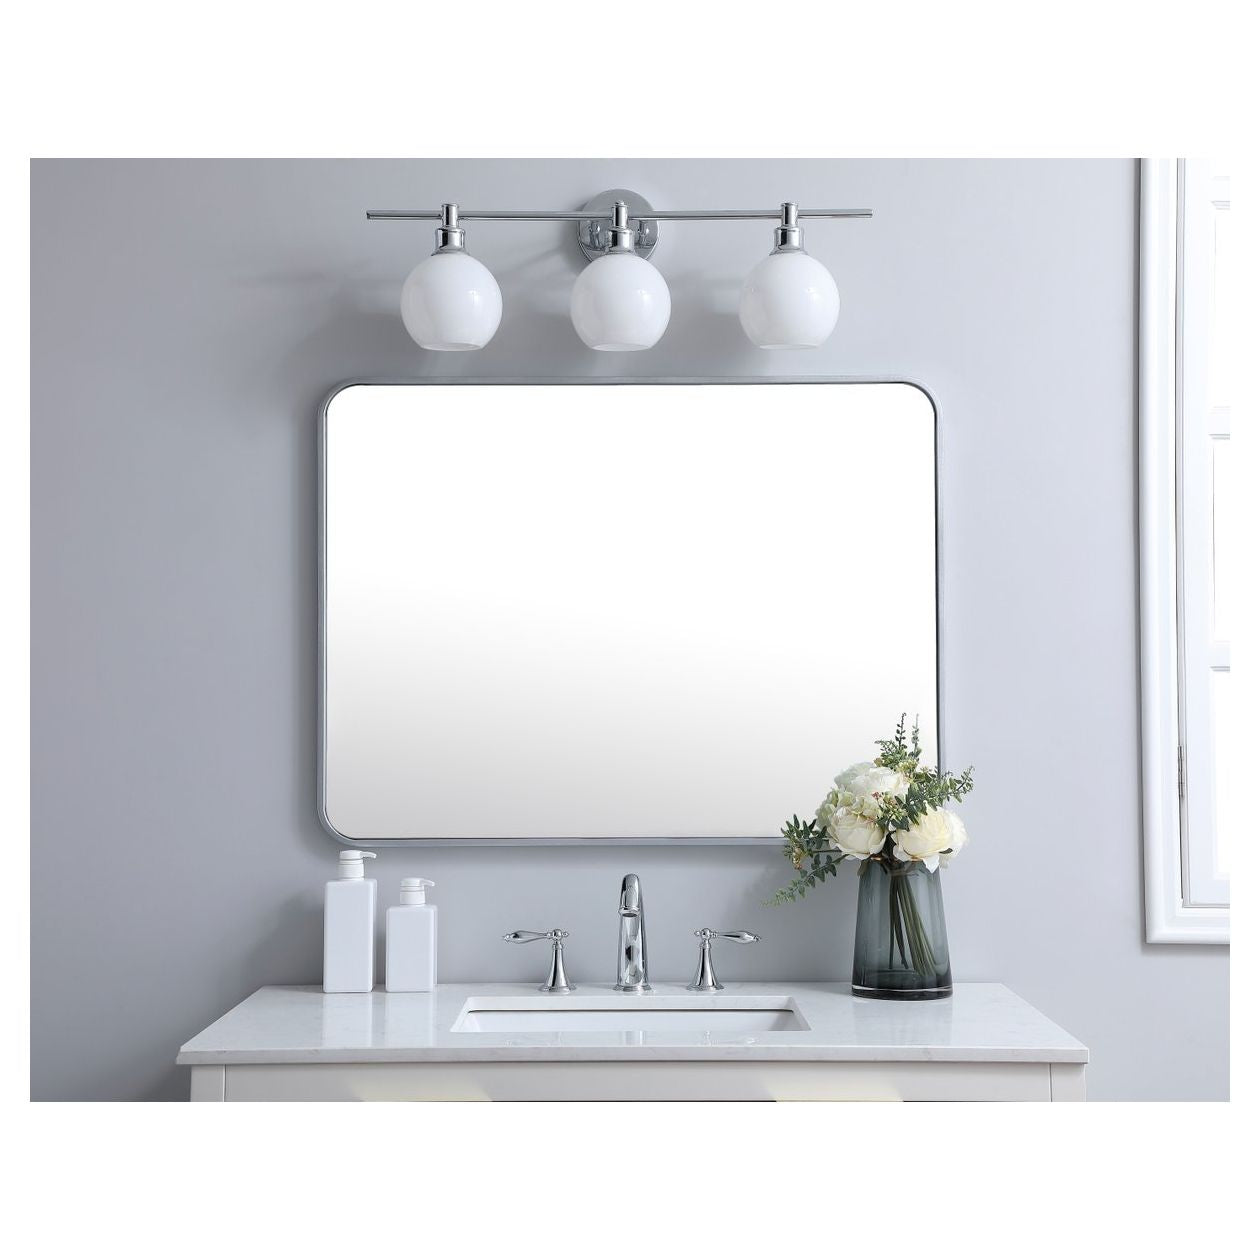 MR802736S Evermore 27" x 36" Metal Framed Rectangular Mirror in Silver